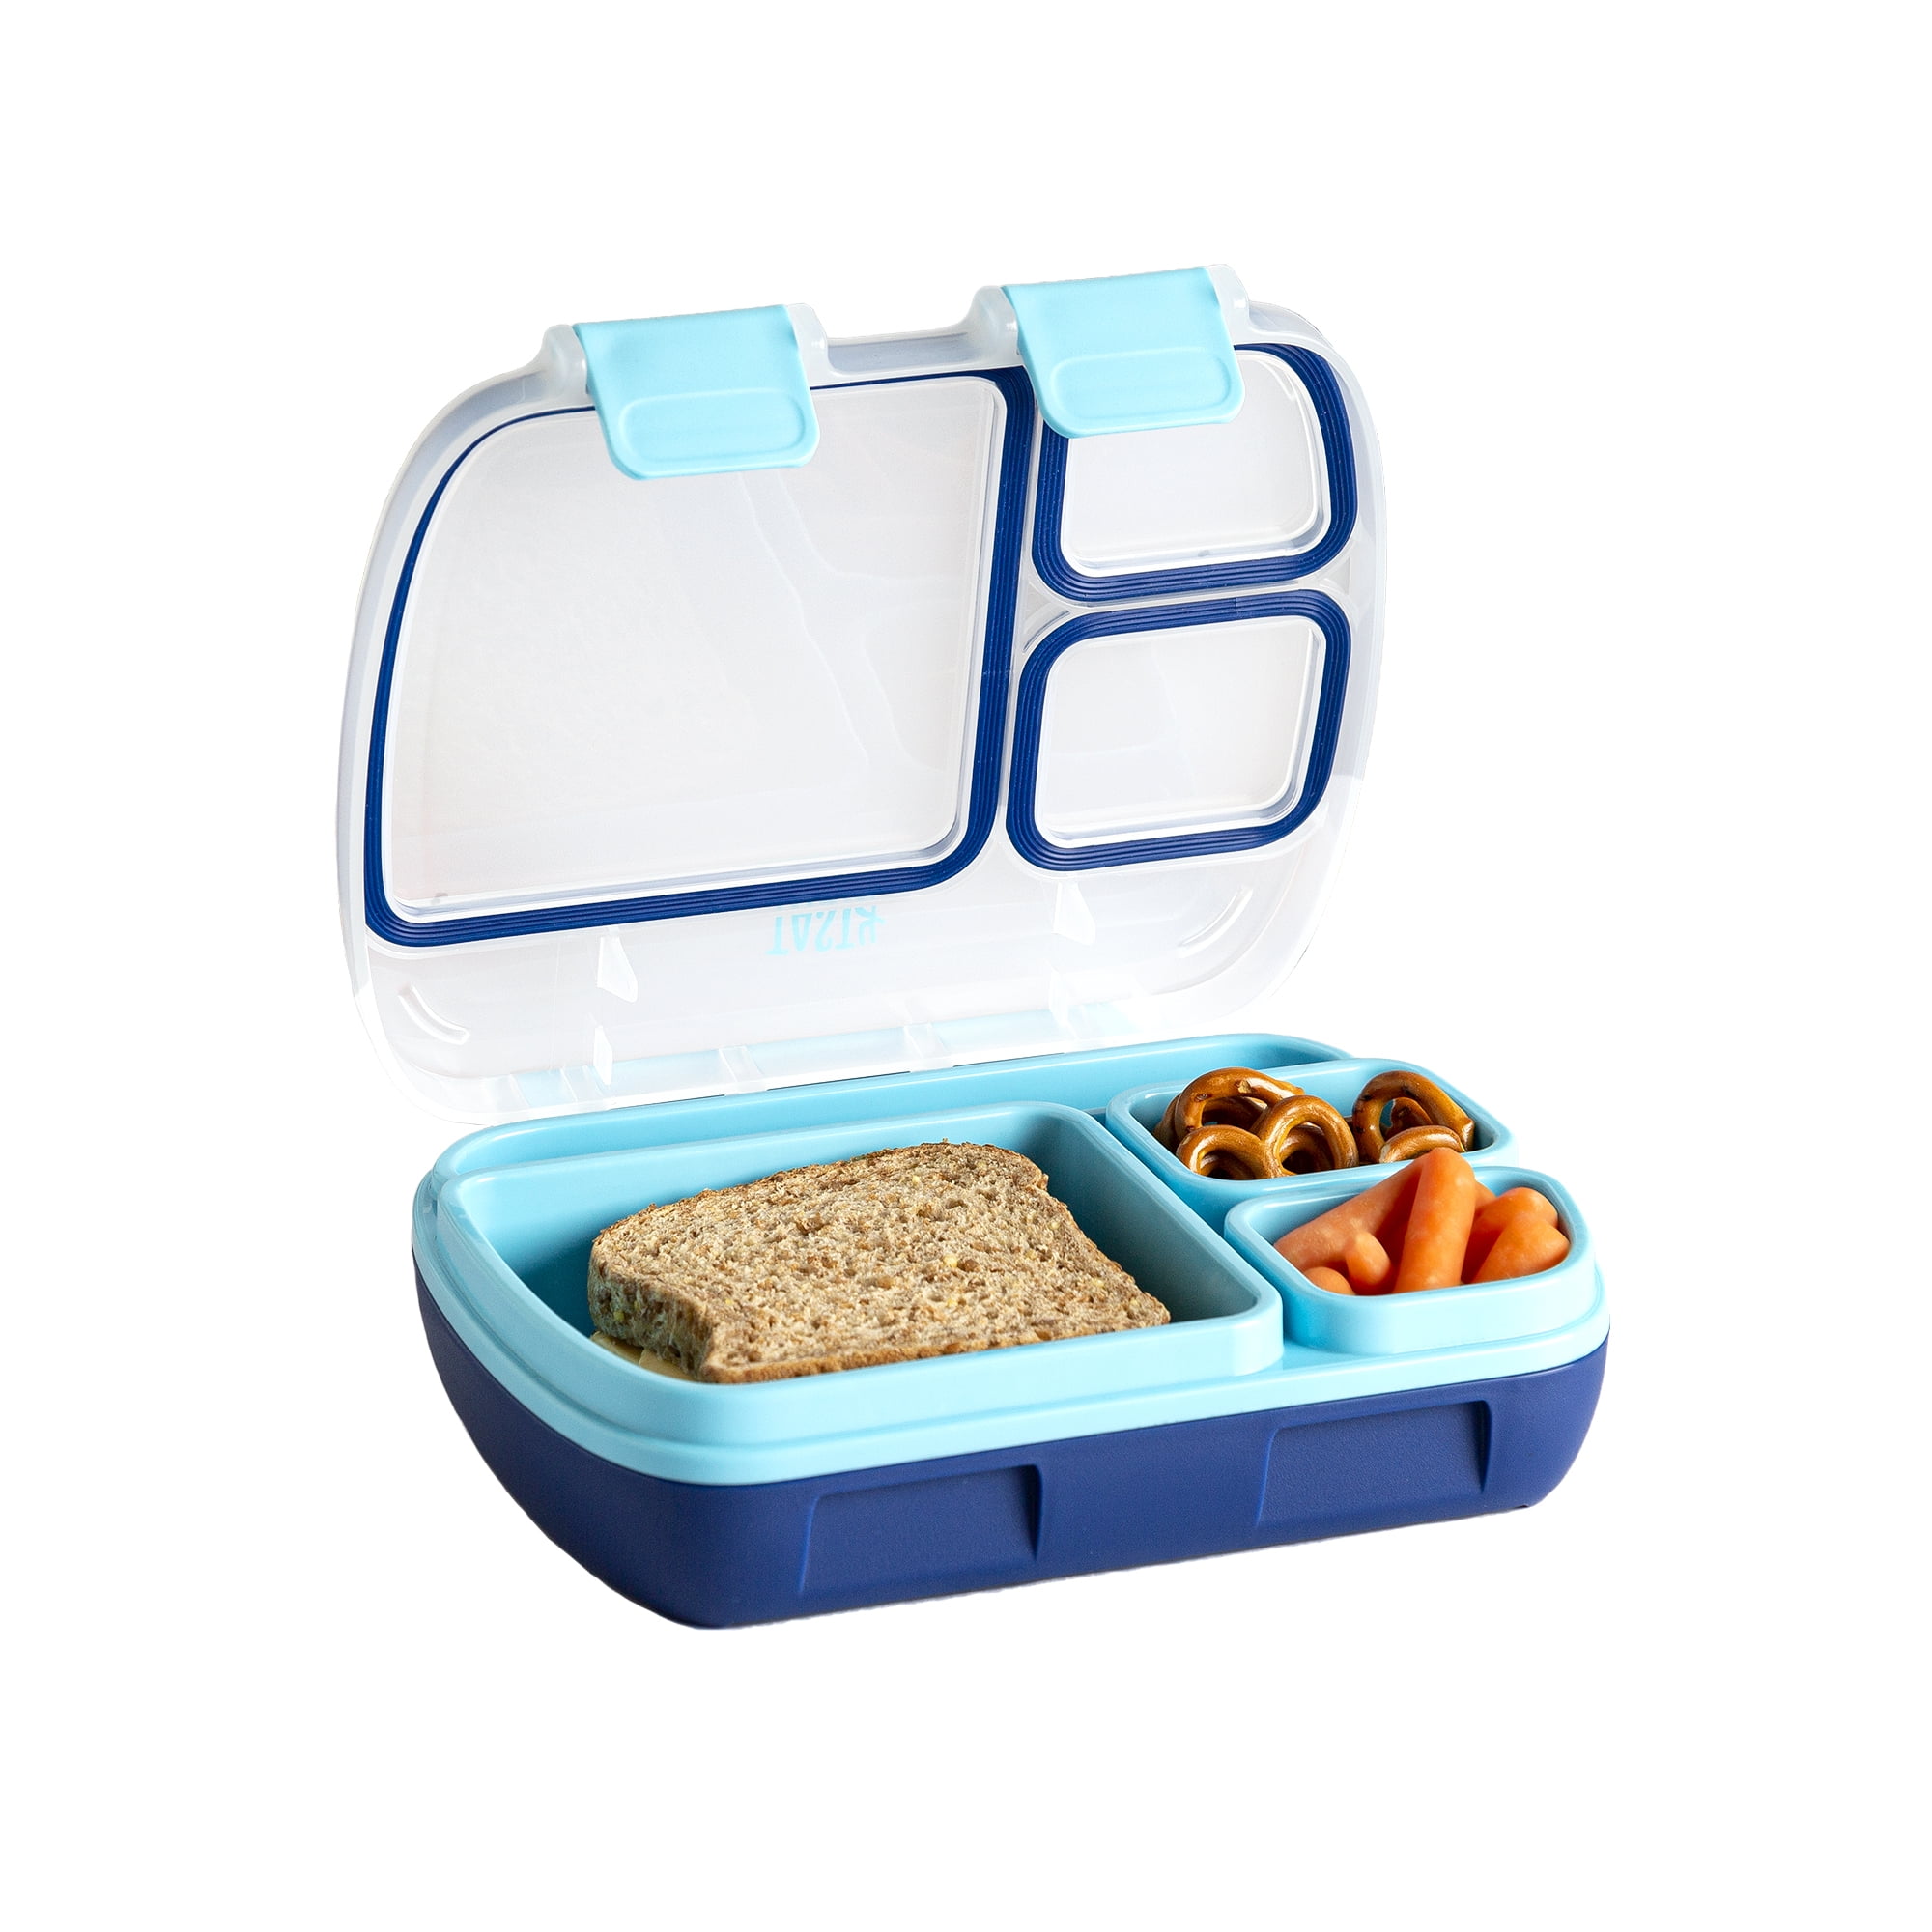 The coolest lunch box accessories for kids